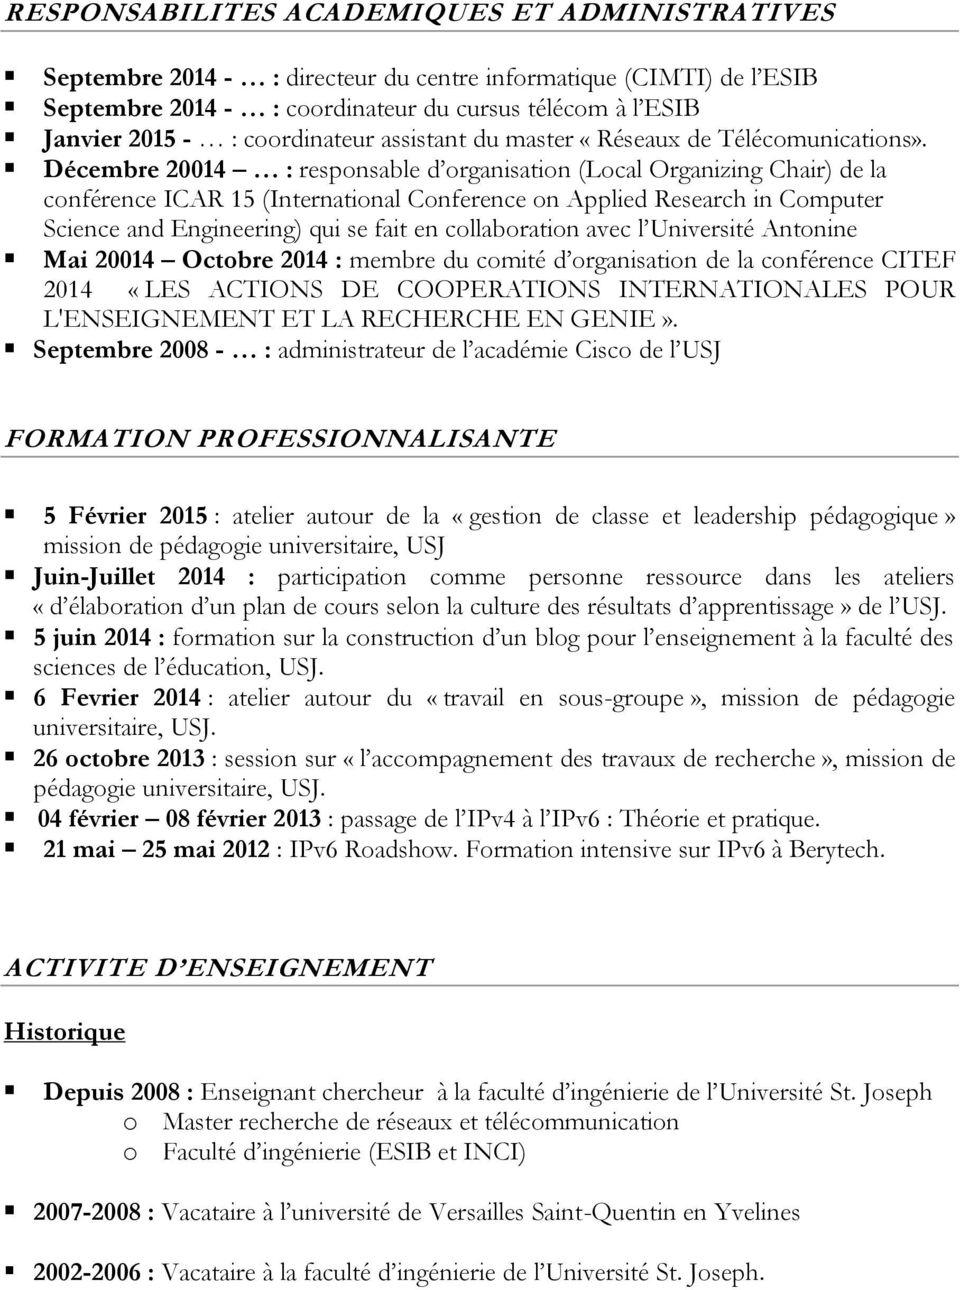 Décembre 20014 : responsable d organisation (Local Organizing Chair) de la conférence ICAR 15 (International Conference on Applied Research in Computer Science and Engineering) qui se fait en